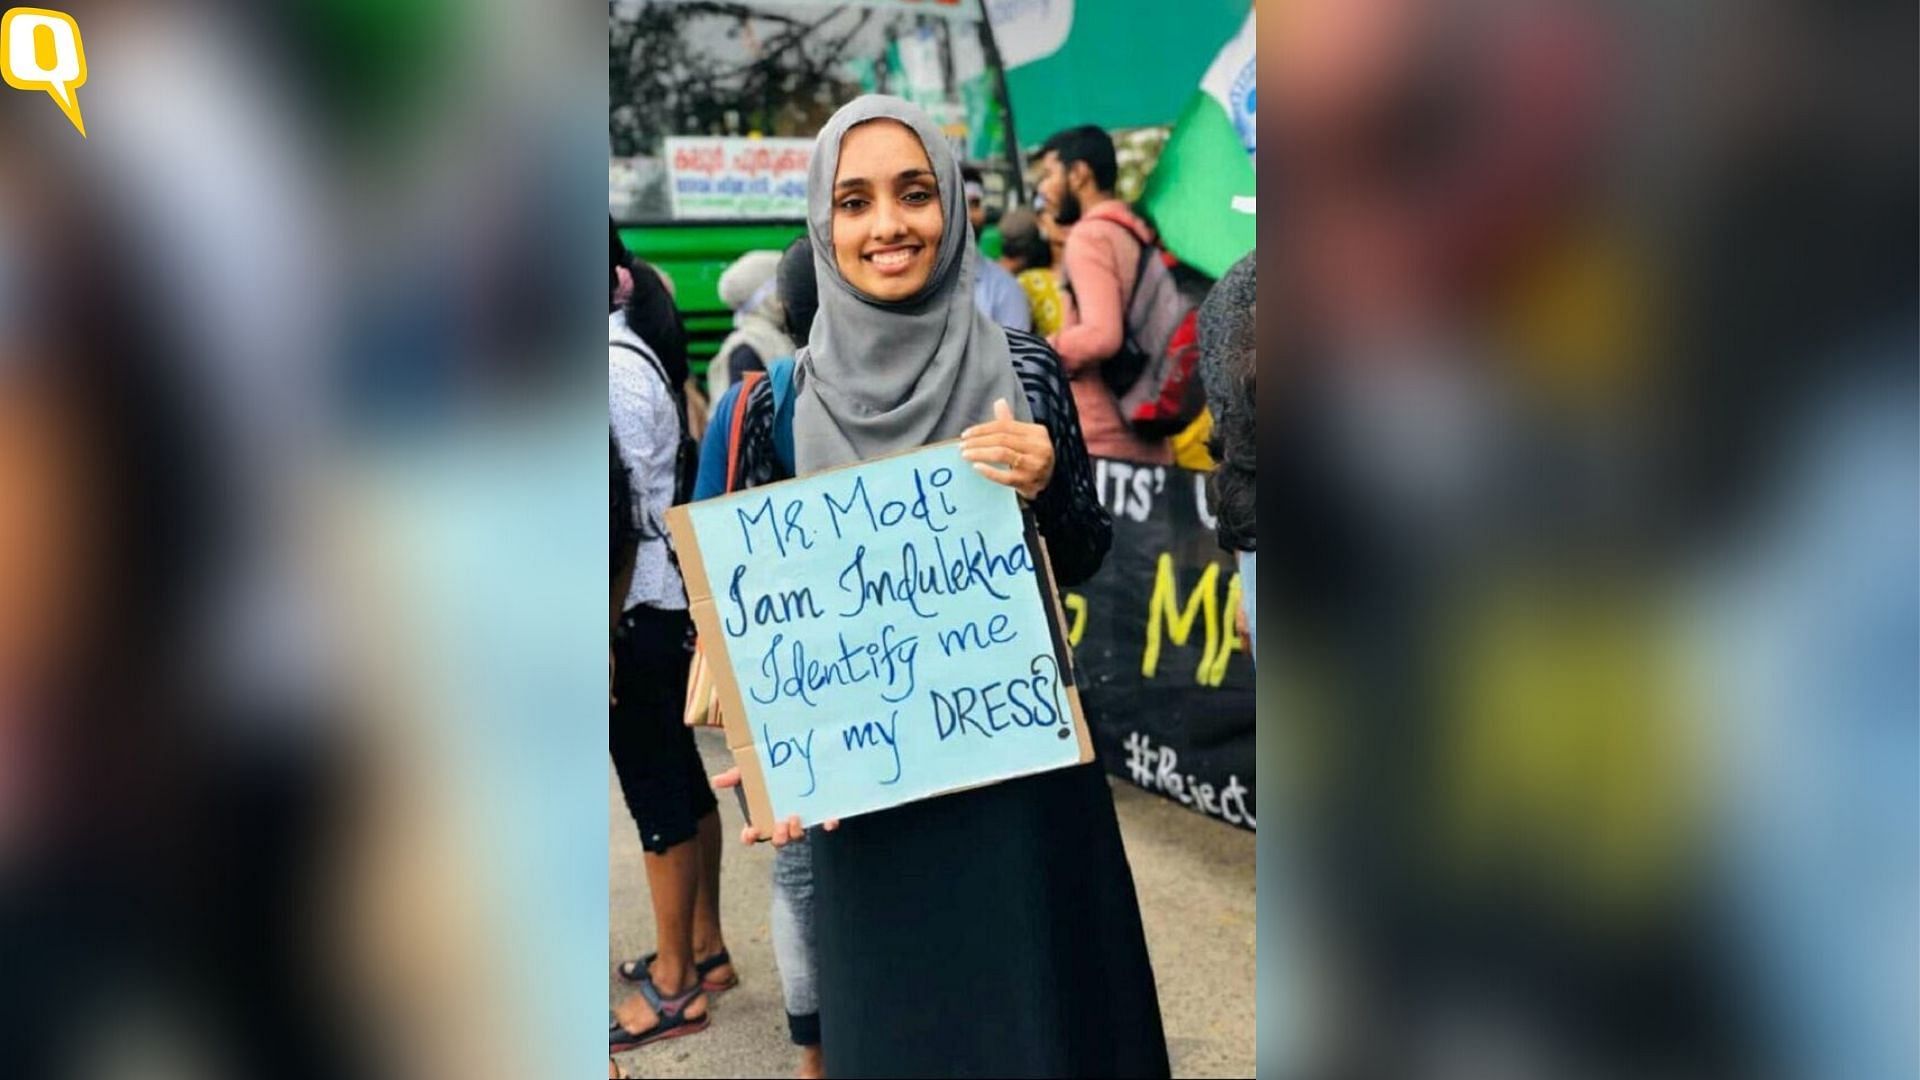 Photo of protestor Indulekha, wearing hijab, holding a placard that reads: ‘Identify me by my dress?’ Image used for representational purposes.